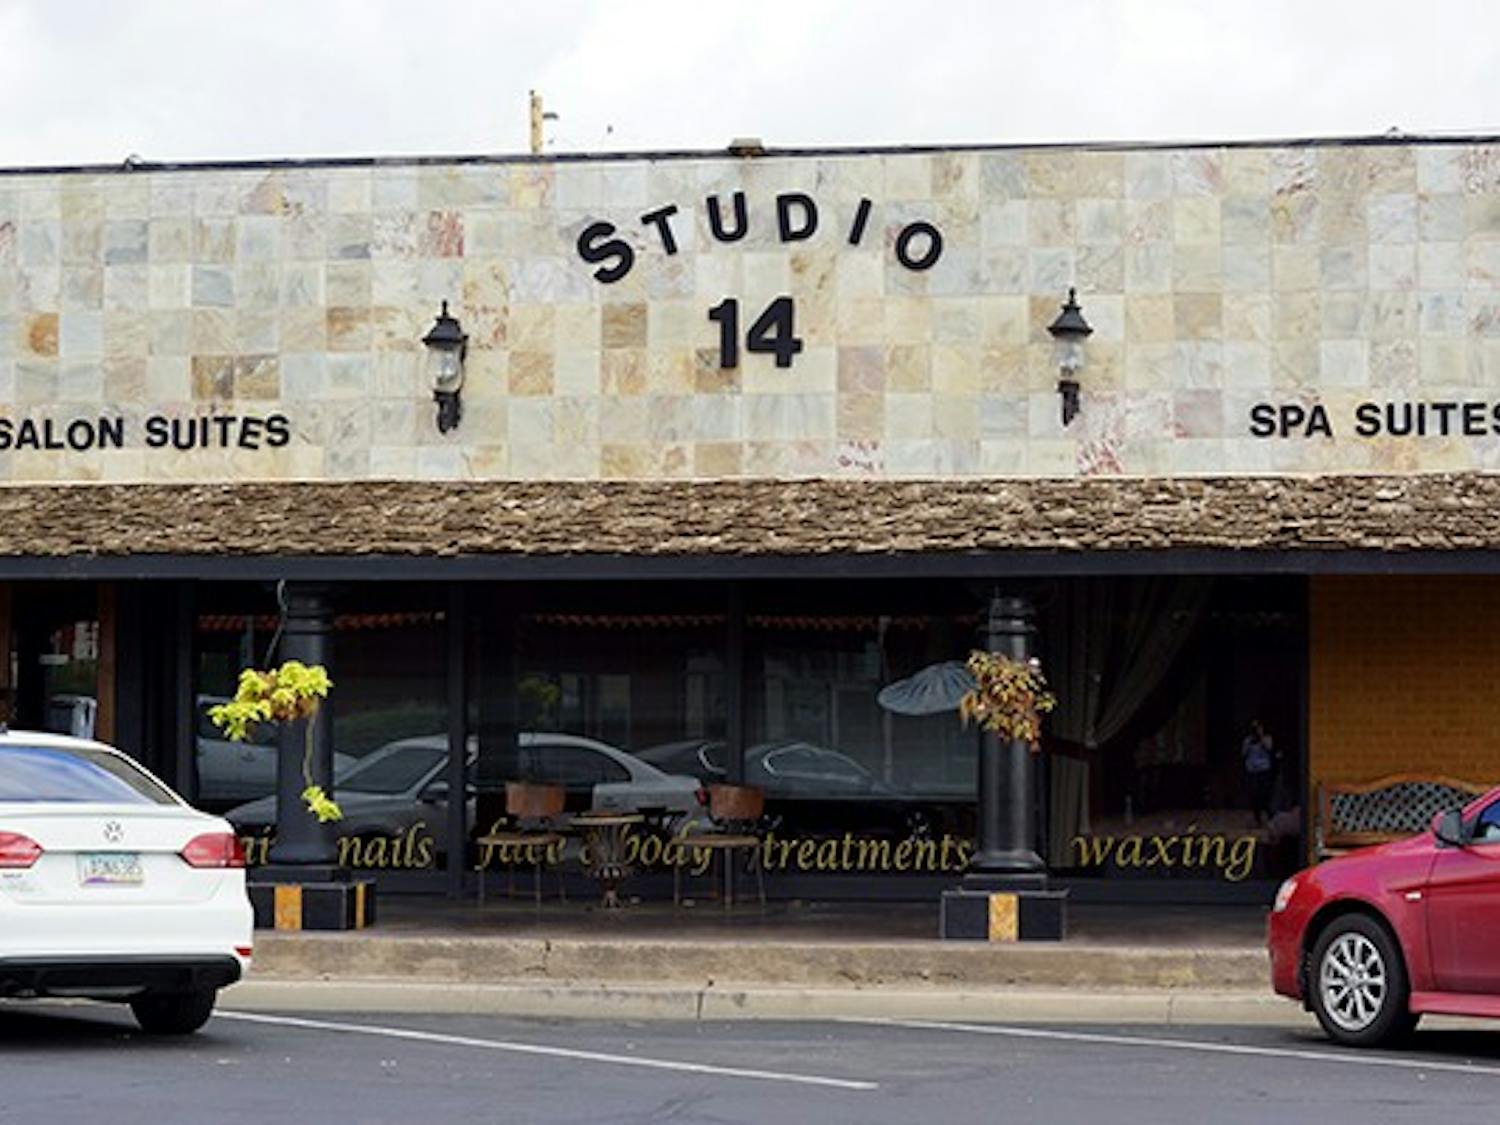 Studio 14 is located in Old Towne Scottsdale and they offer salon professionals a place to own their own salon inside of it. ?(Photo by Stephanie Specht)